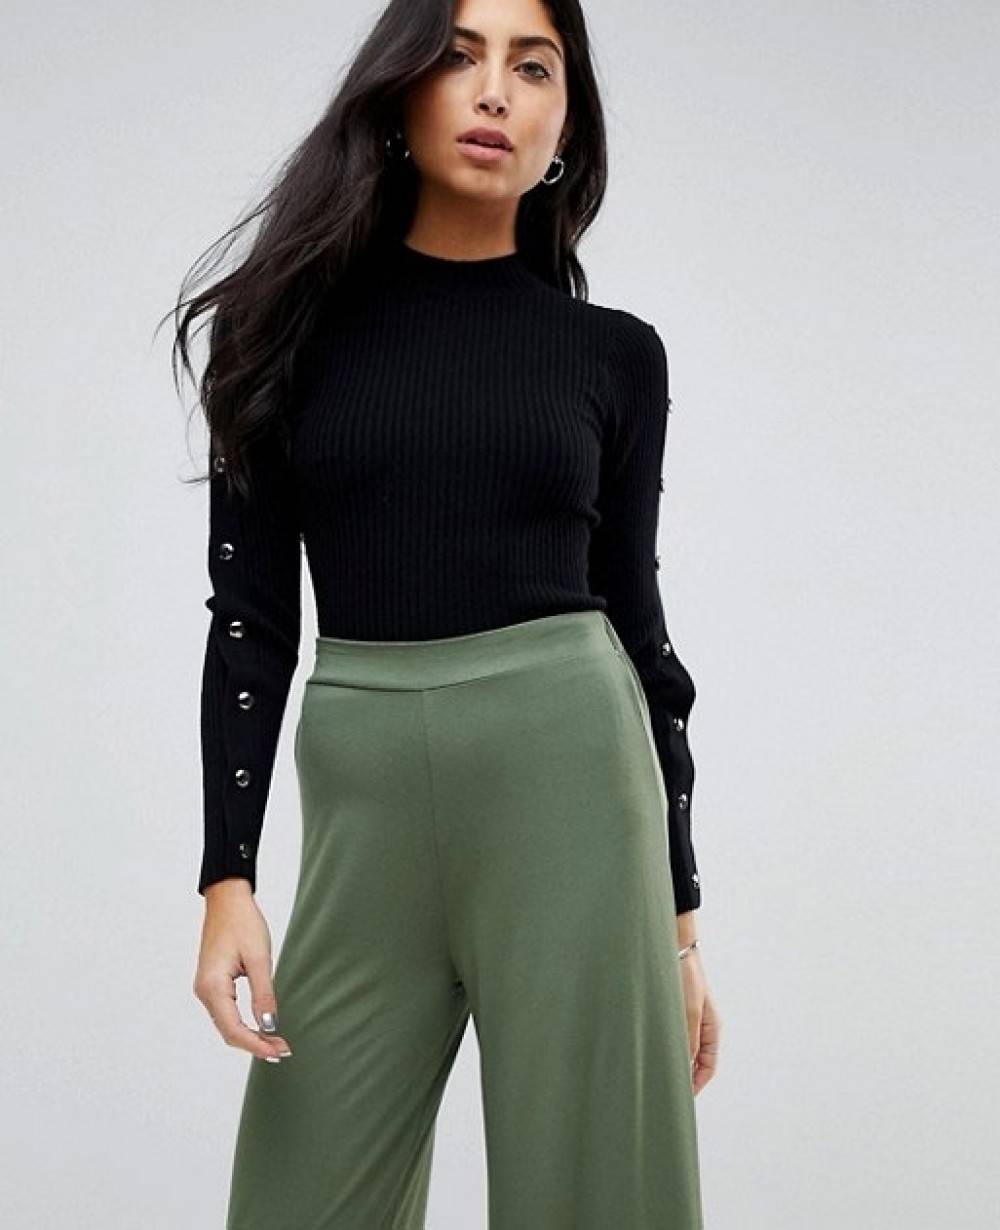 Army Green Sexy Women Bandage Crop Tops